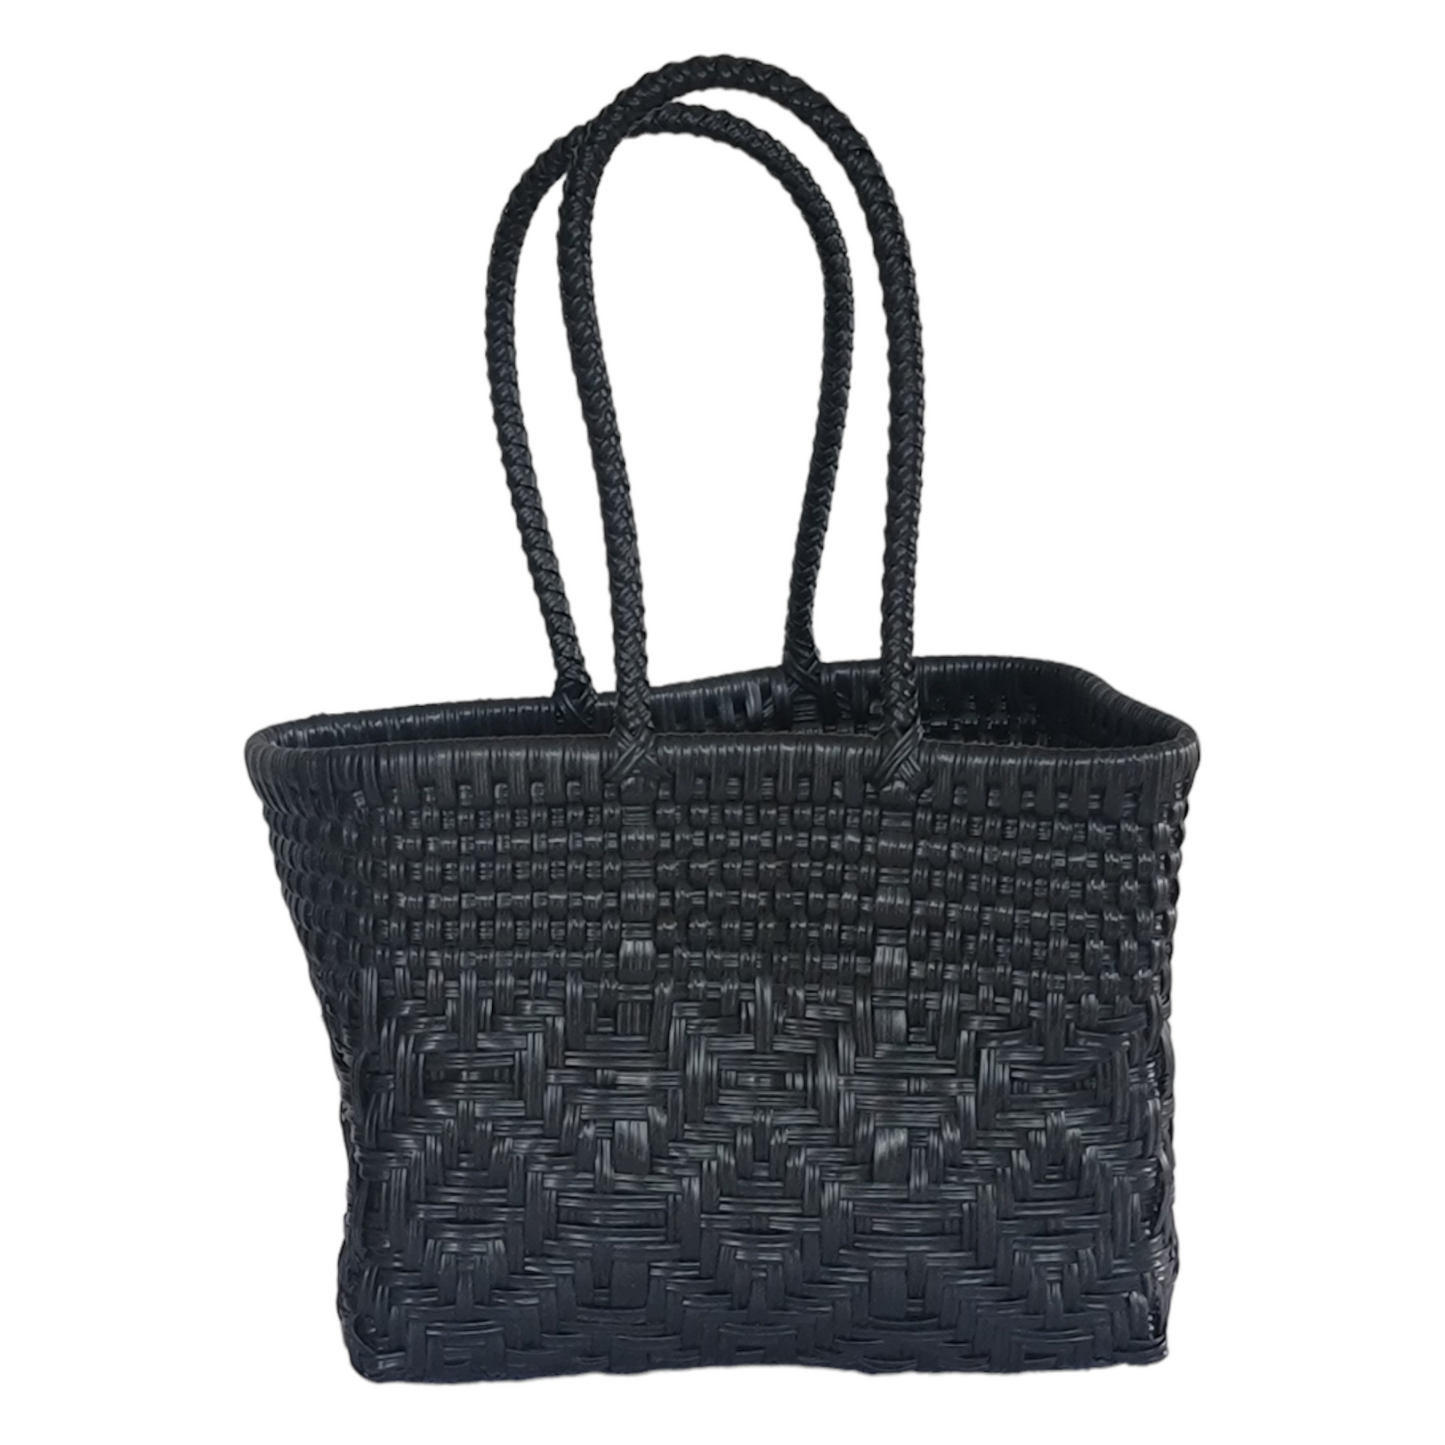 Solid Black Mini Tote | Handwoven recycled bags